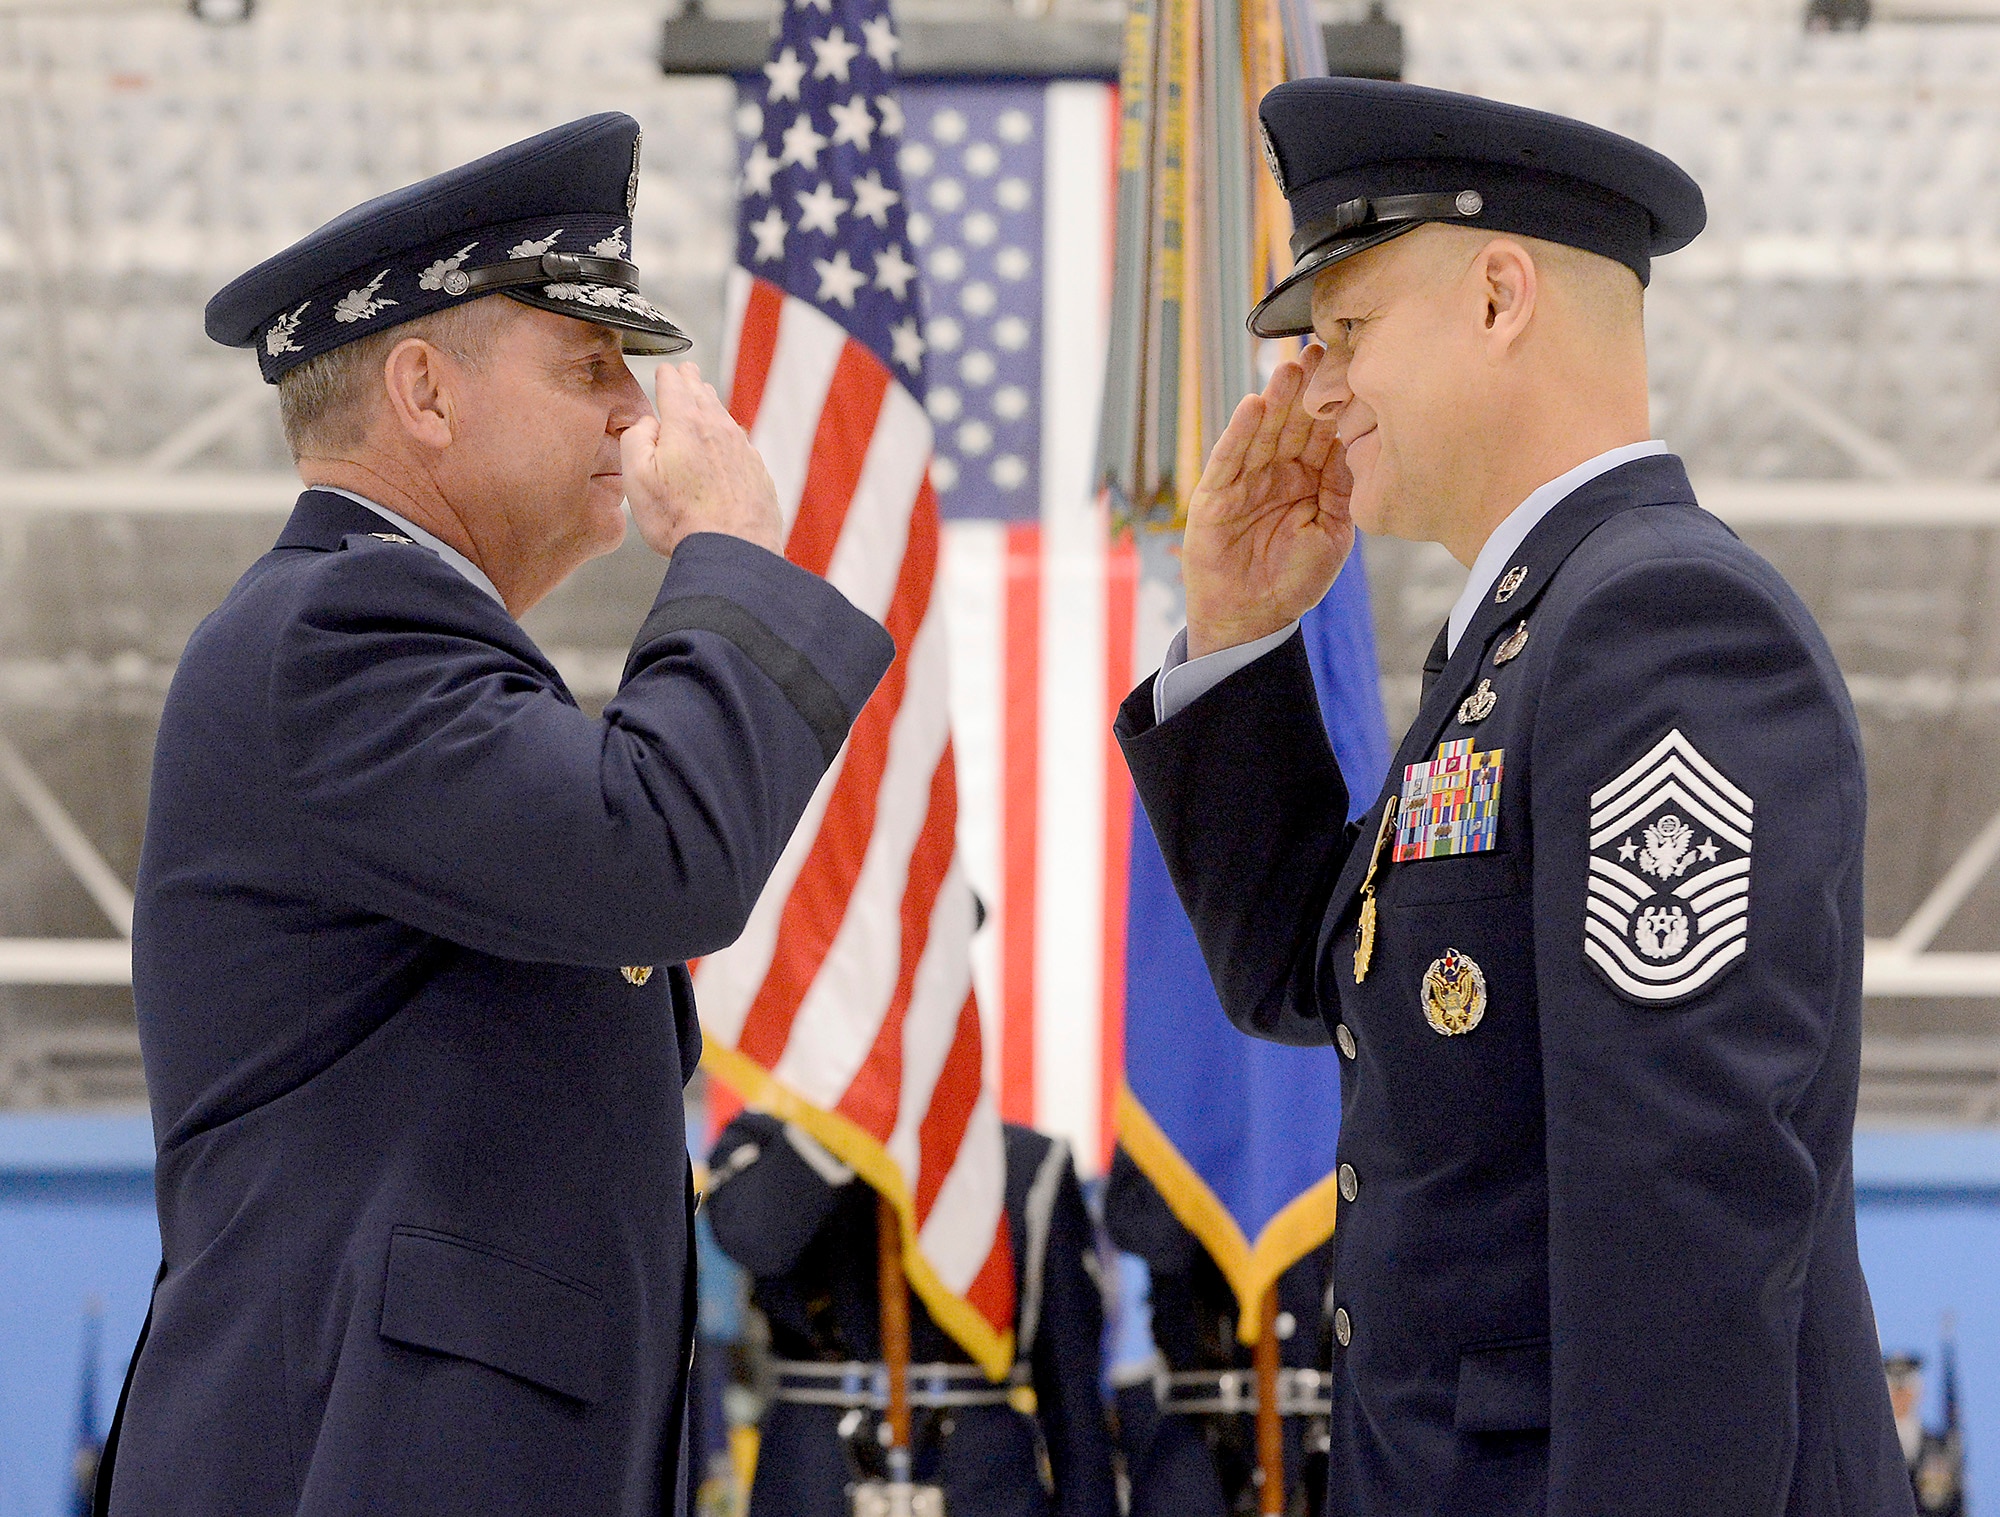 Air Force Chief of Staff Gen. Mark A. Welsh III congratulates Chief Master Sgt. of the Air Force James Roy at Joint Base Andrews, Md., on Jan. 24, 2013, during his retirement ceremony.   (U.S. Air Force photo/Scott M. Ash)